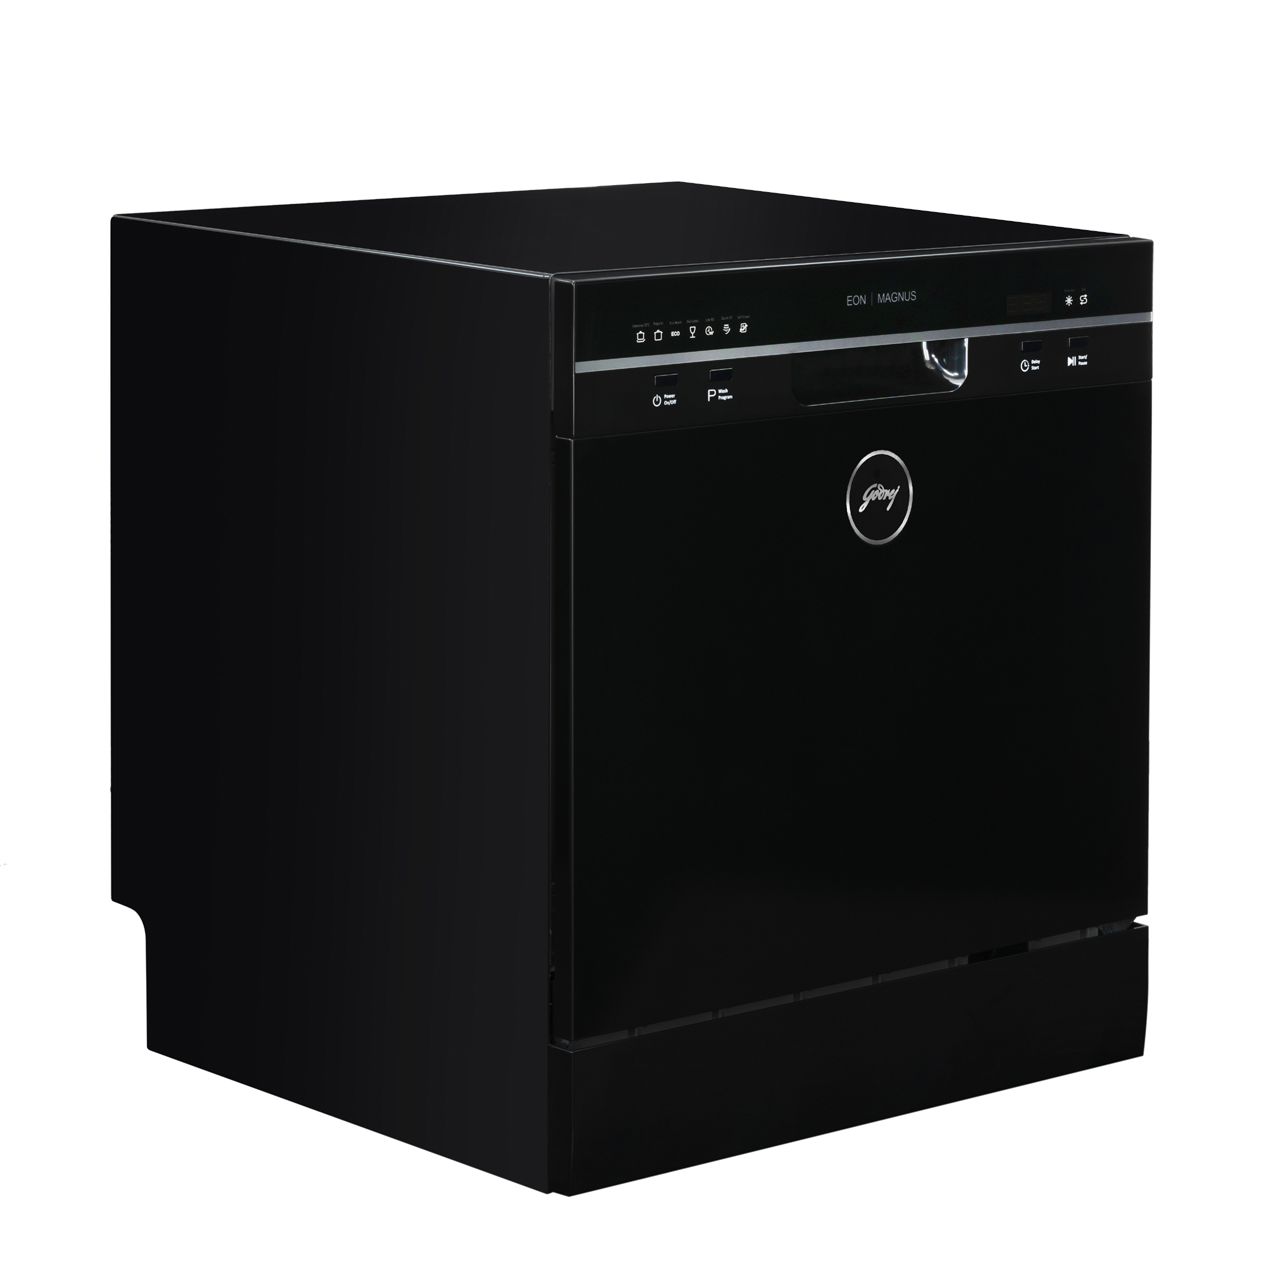 Godrej Appliances introduces compact counter-top dishwasher for smaller families